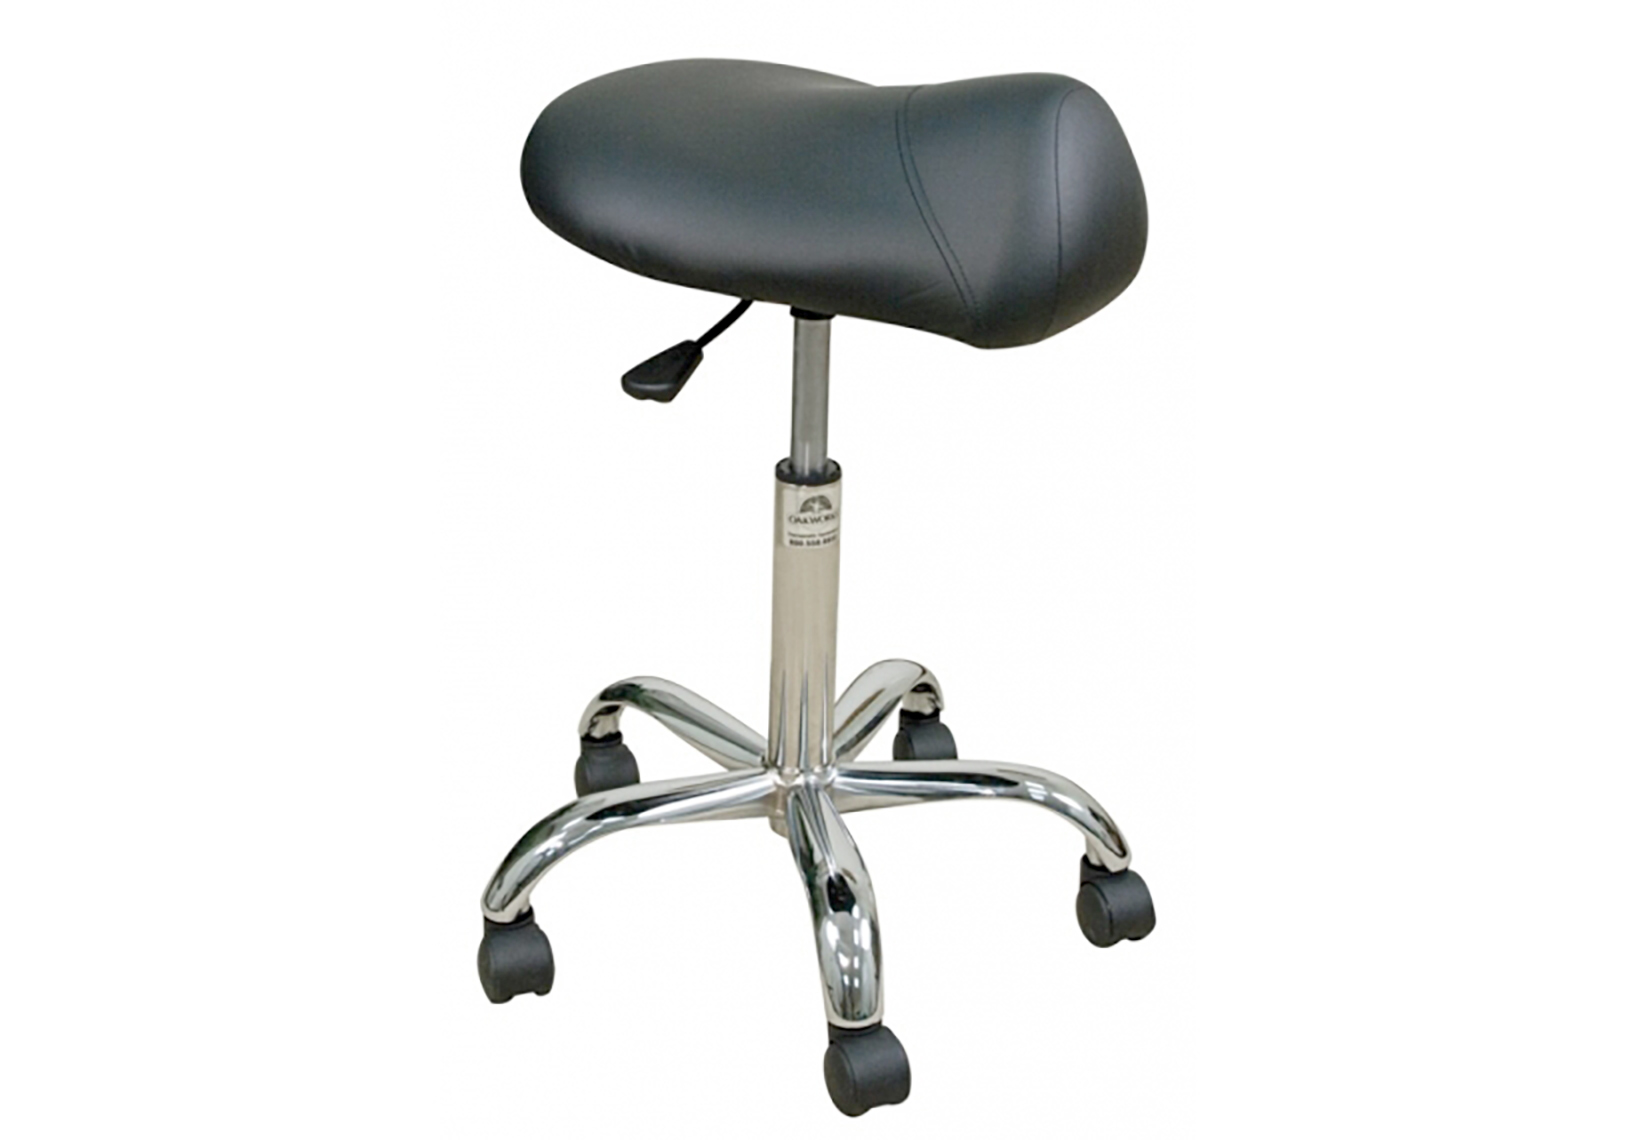 Professional Stool with Saddle Seat - High Height Range